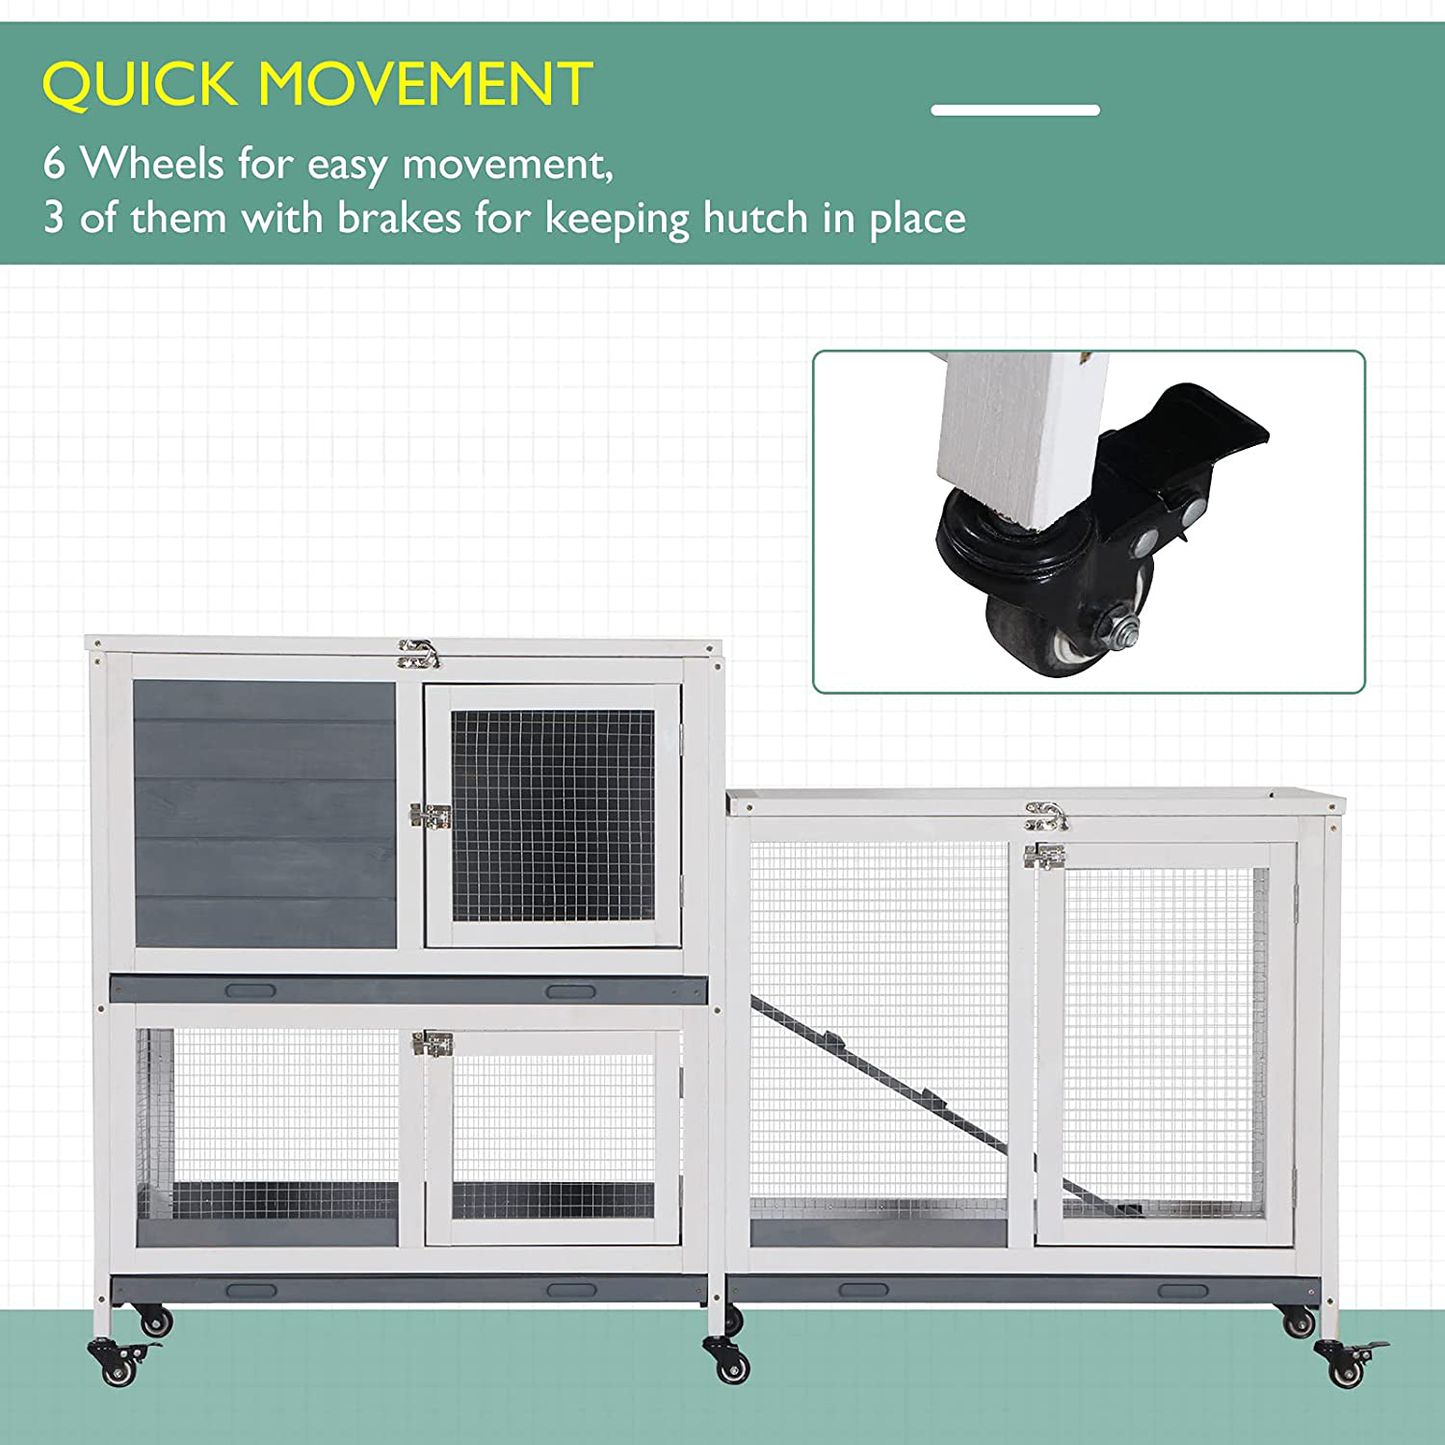 Pawhut Wooden Rabbit Hutch Elevated Pet House Bunny Cage Small Animal Habitat with Slide-Out Tray Lockable Door Openable Top for Indoor 57.75" X 18" X 32.5" Grey Animals & Pet Supplies > Pet Supplies > Small Animal Supplies > Small Animal Habitats & Cages PawHut   